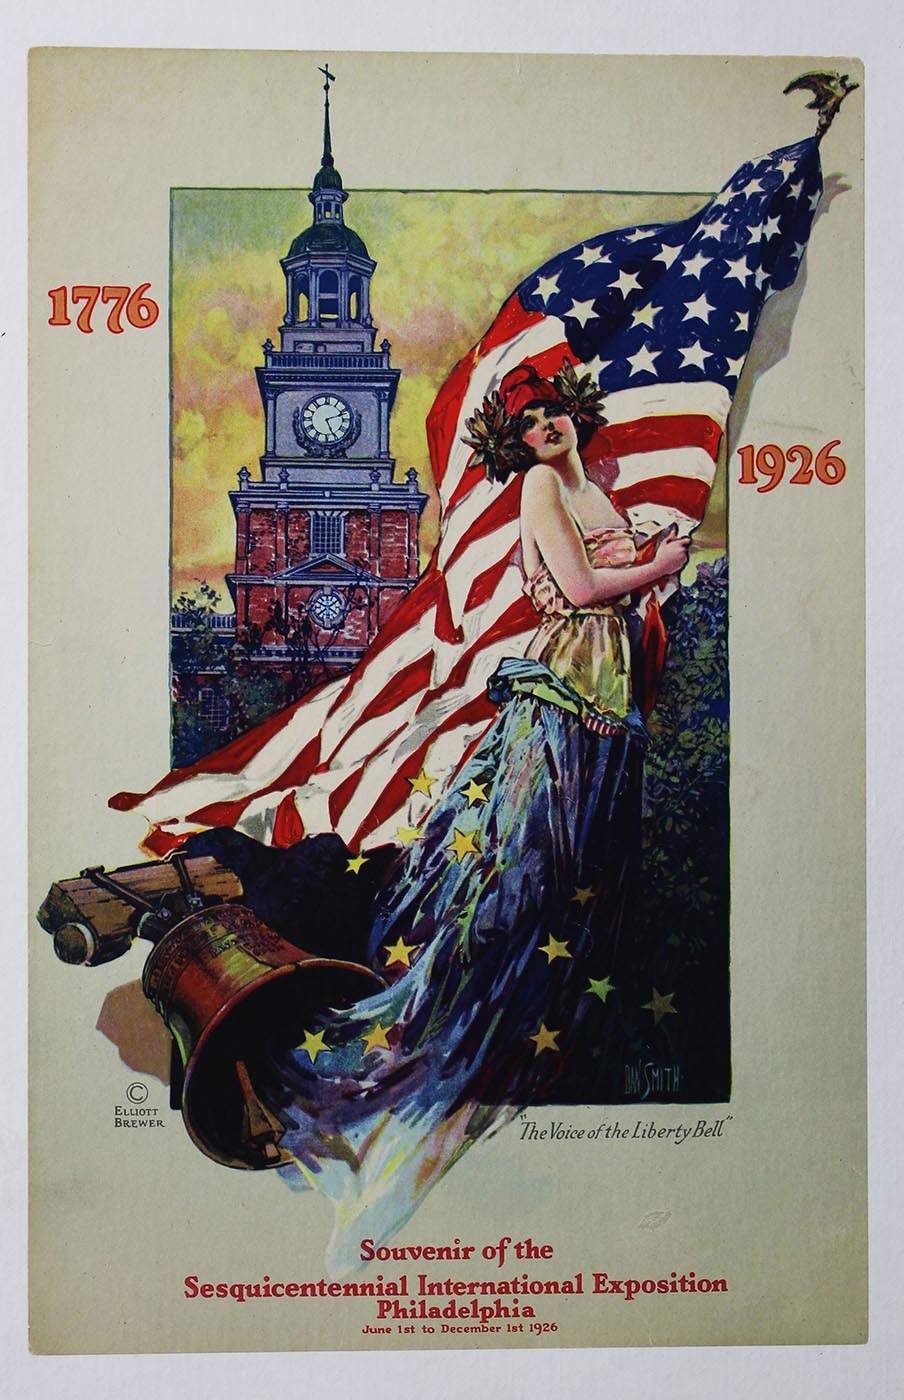 The Voice of the Liberty Bell, 1776–1926, poster created by Dan Smith and printed by Elliott Brewer, Philadelphia, 1926 . (The Gilder Lehrman Institute of American History, GLC09657)